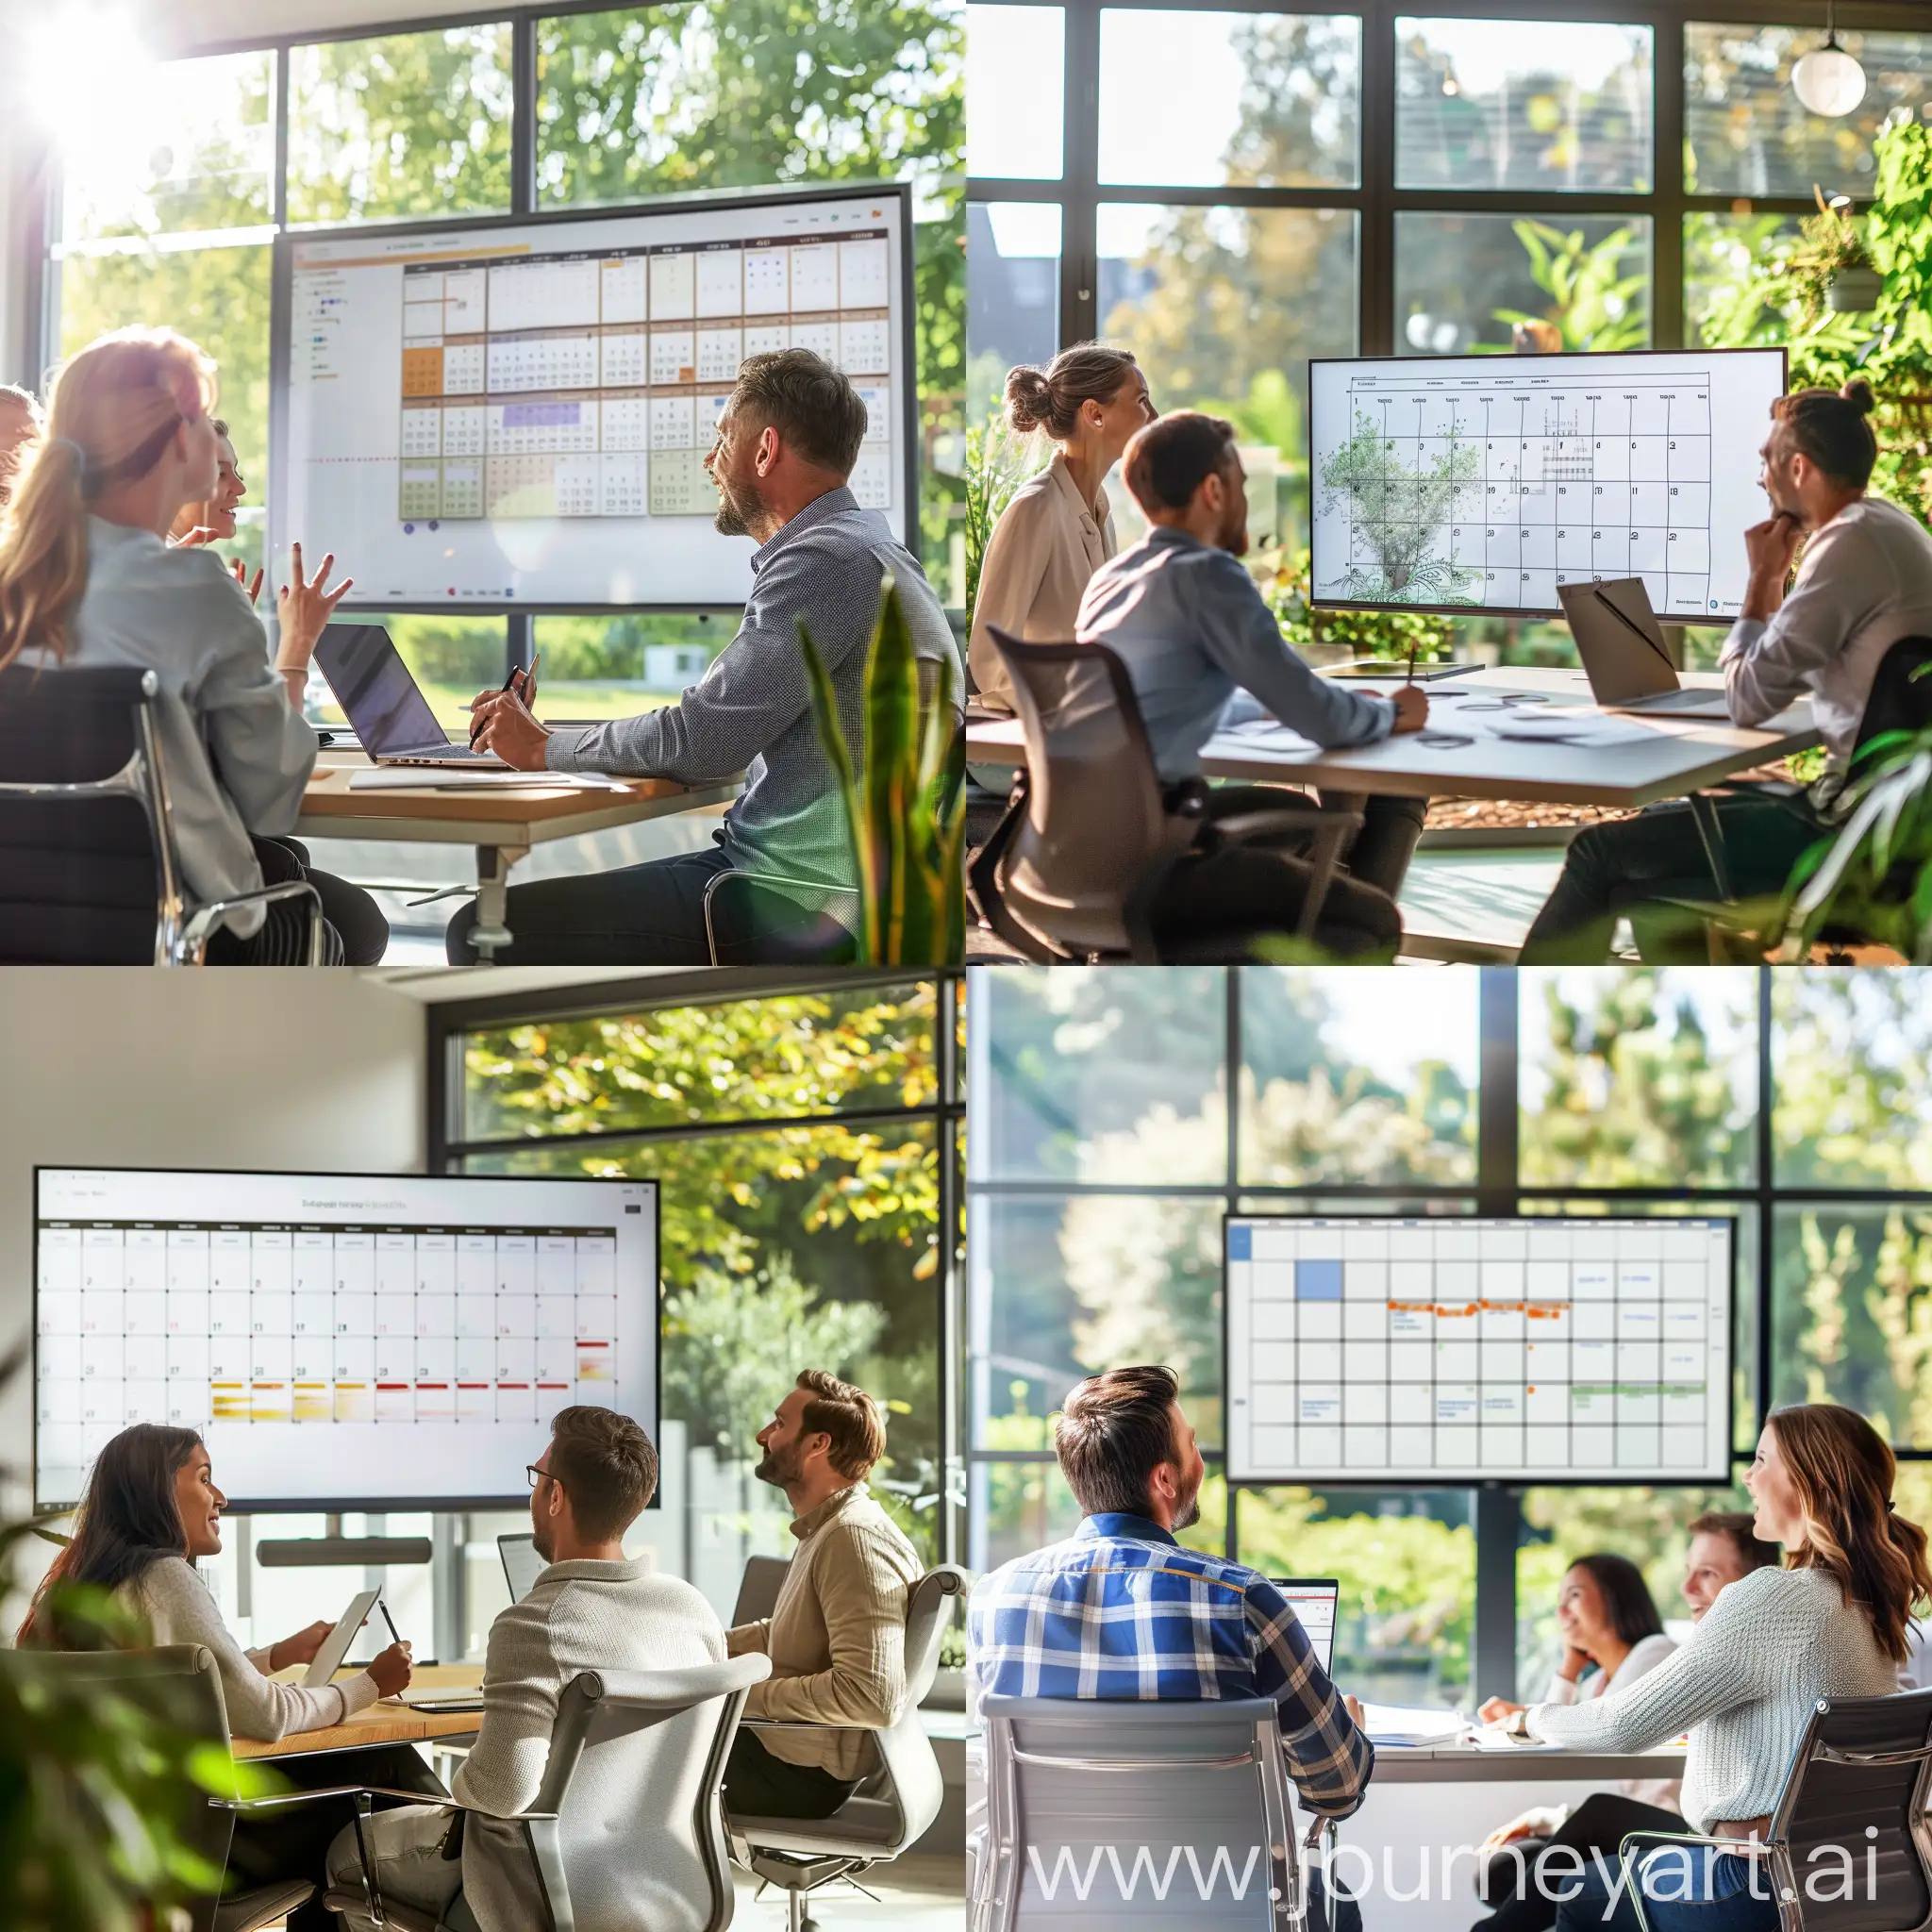 happy people sitting in office room planning their project activities with virtocalendar, on a big screen, men and women, light room, sunny, greens outside, positive atmosphere